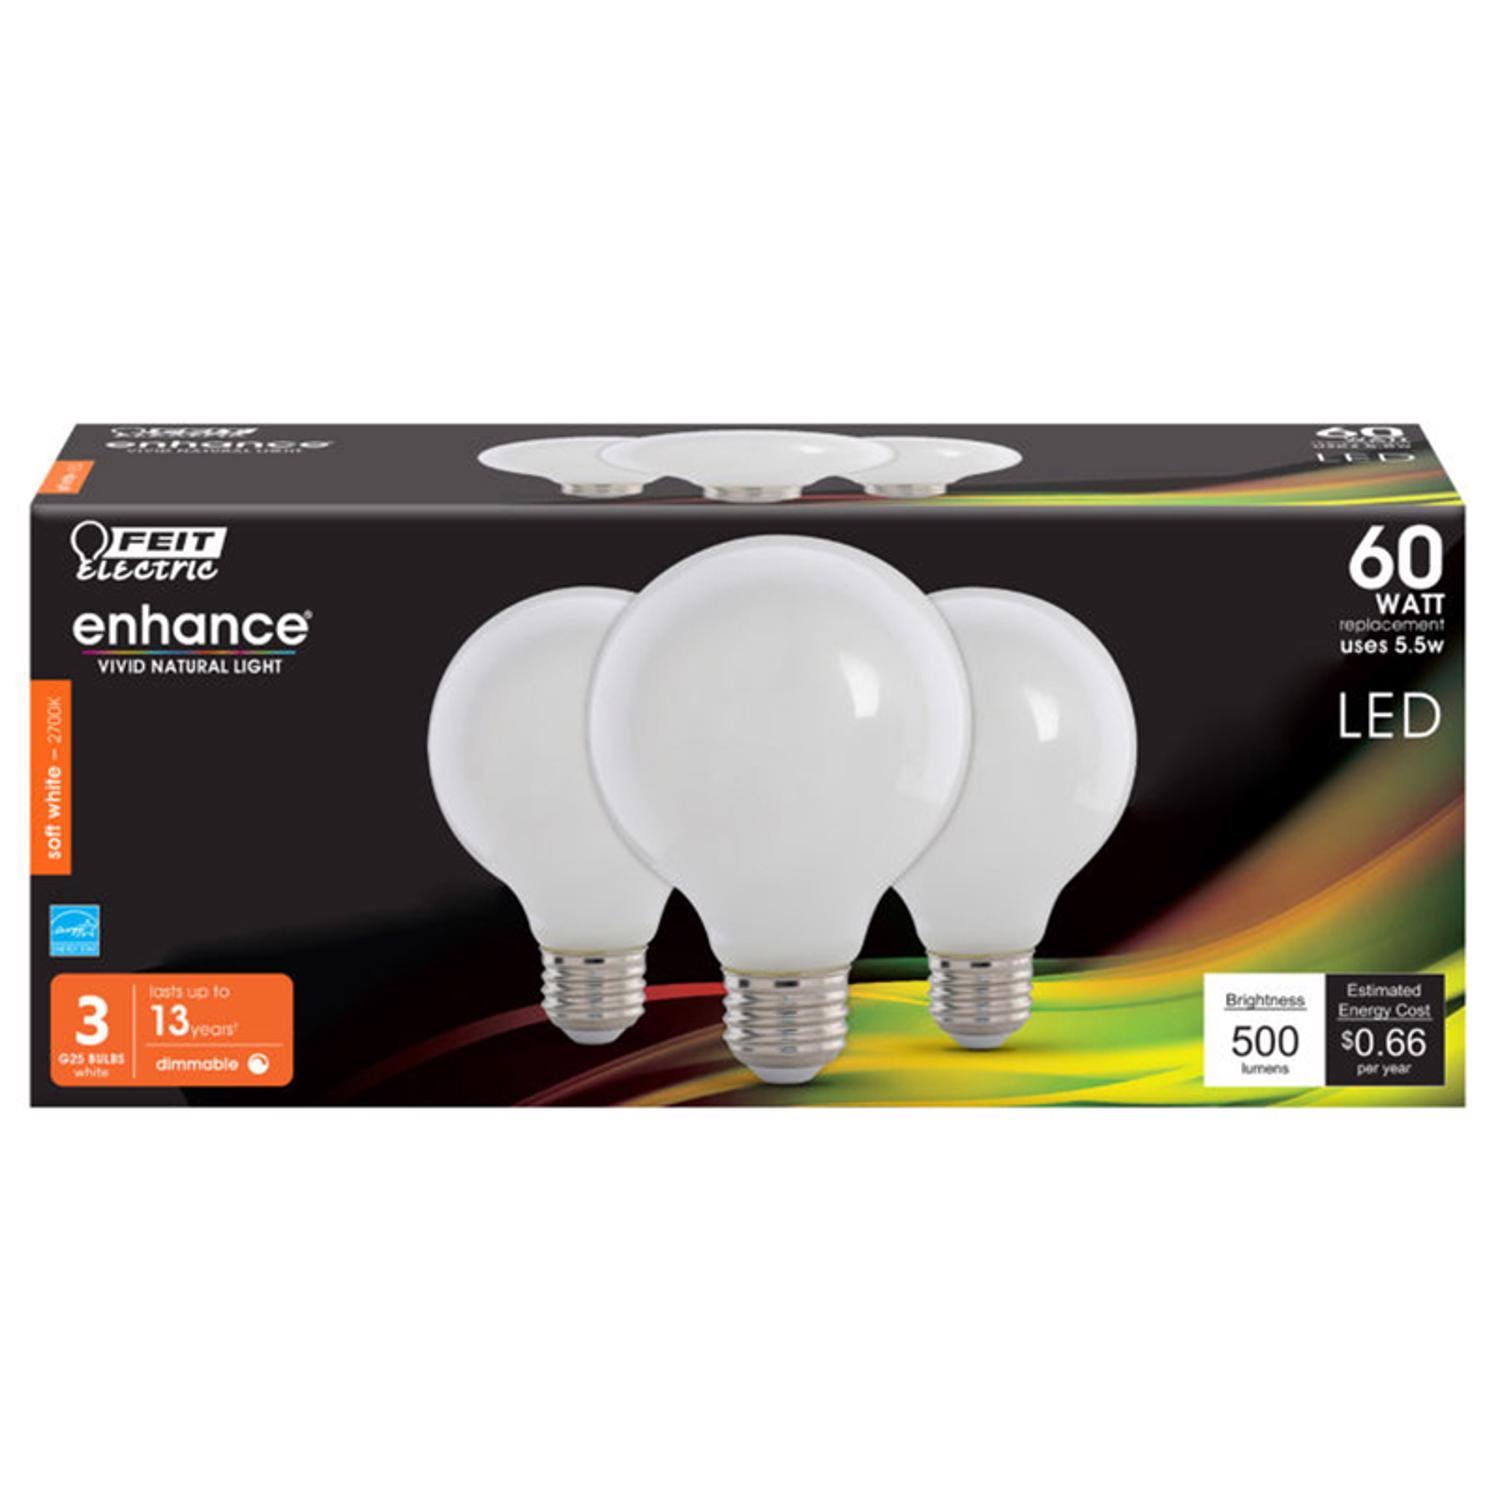 Feit Electric G25 Dimmable Filament CEC Title 20 LED Glass Light Bulb - Soft White, 60W, 3pk